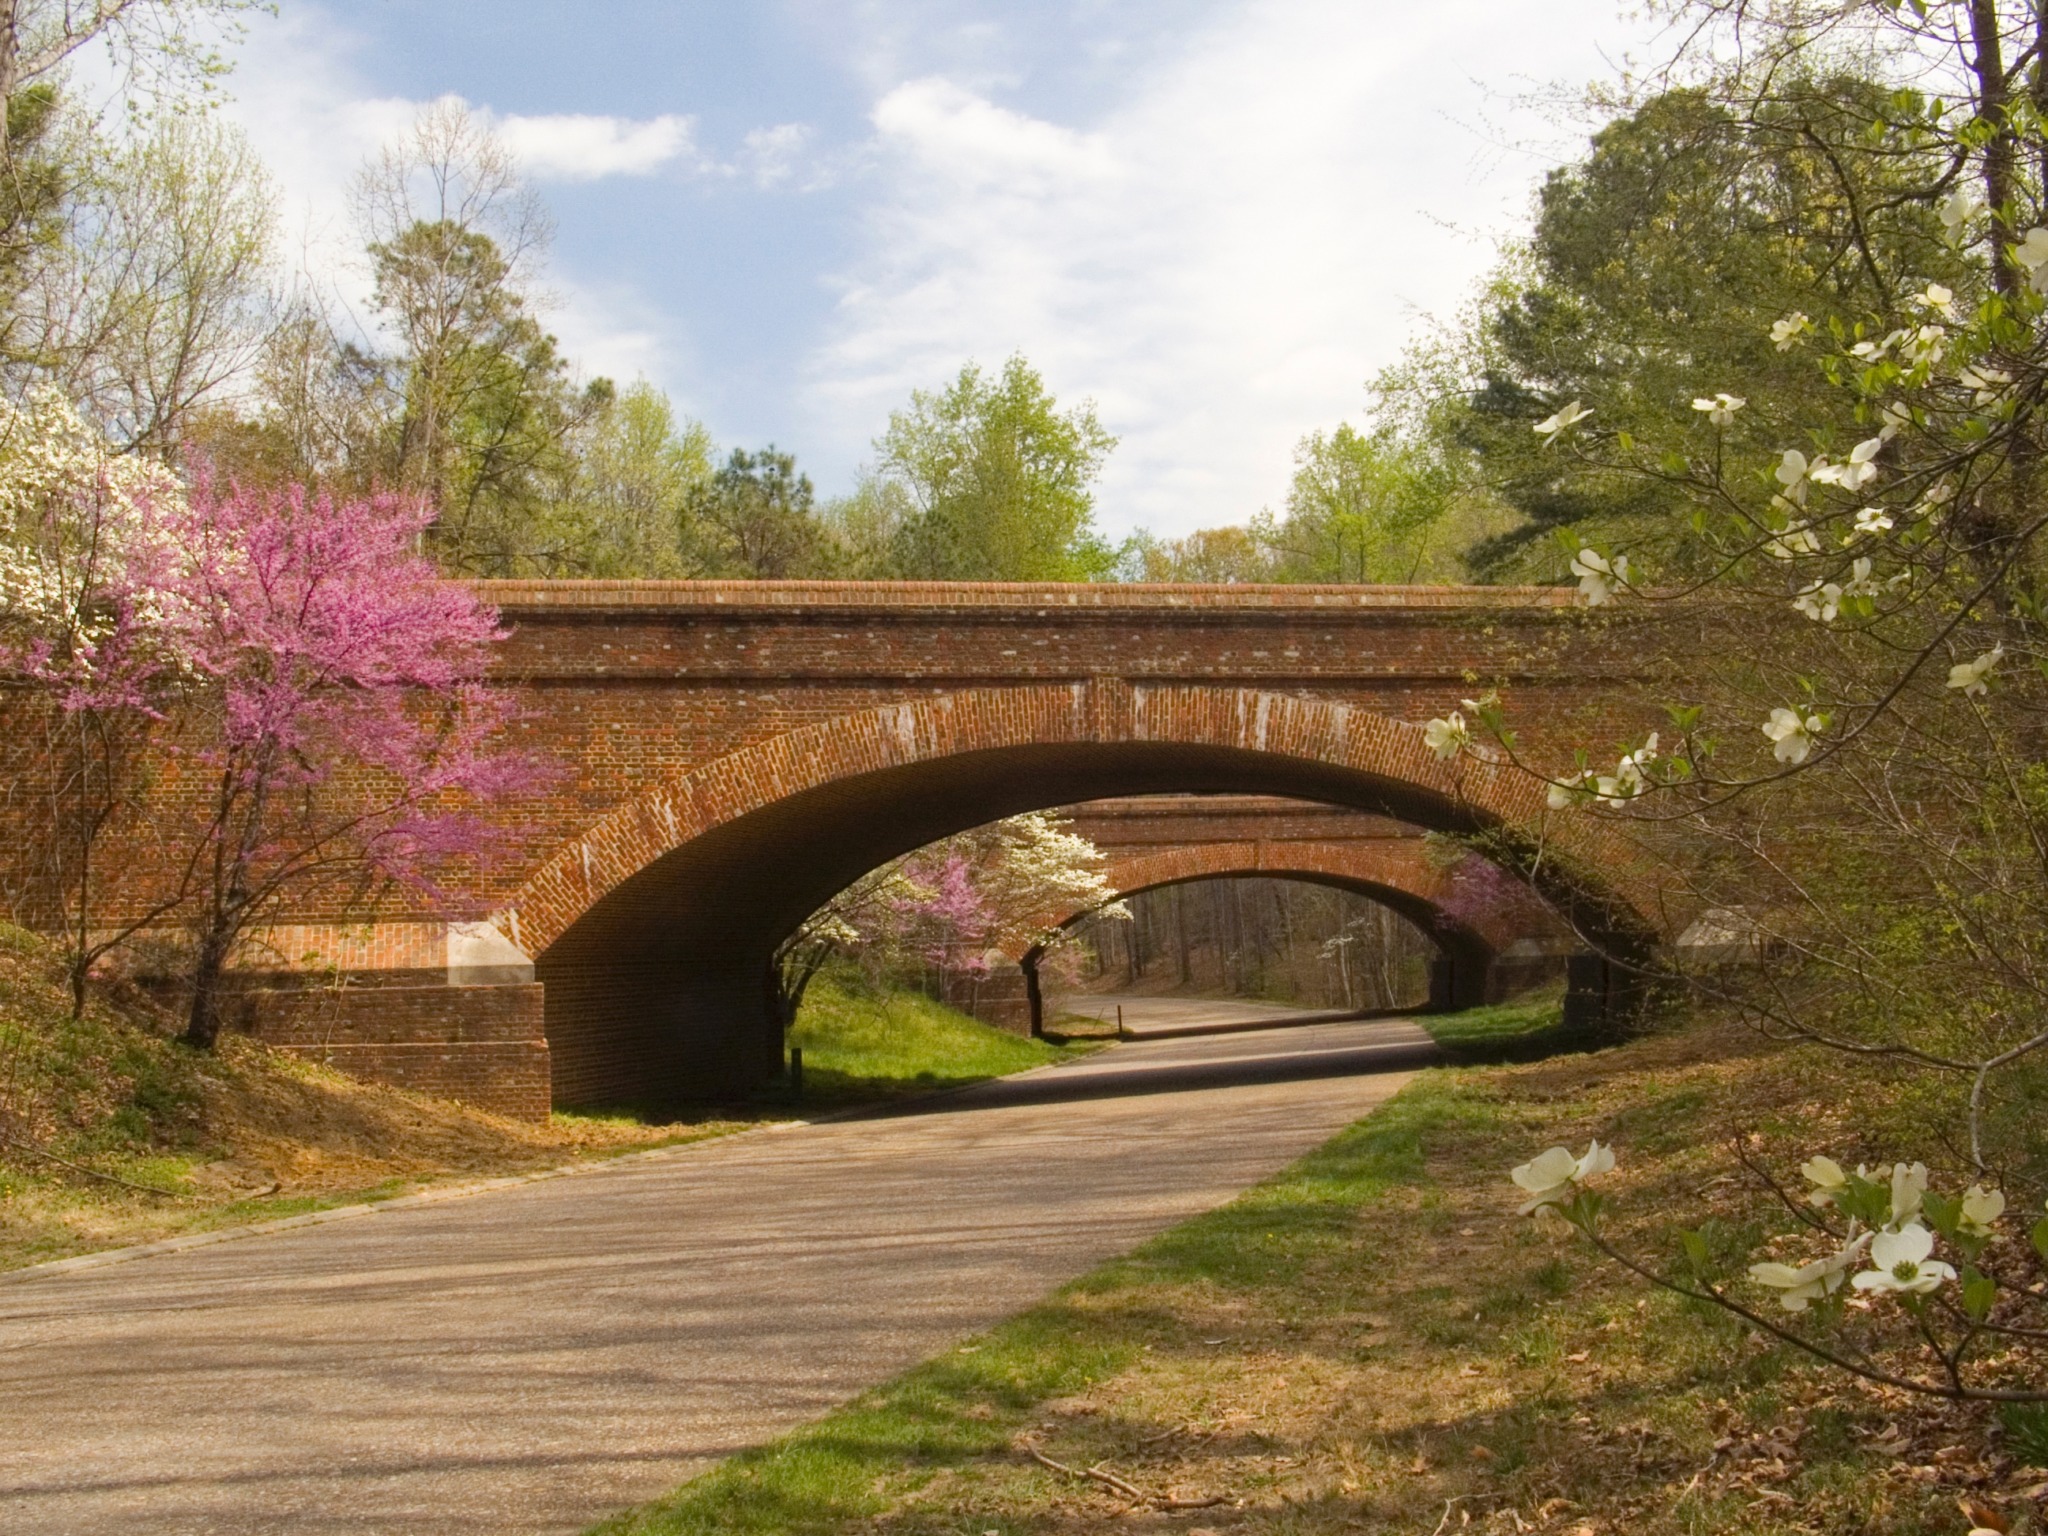 Bridge over the colonial parkway in Spring